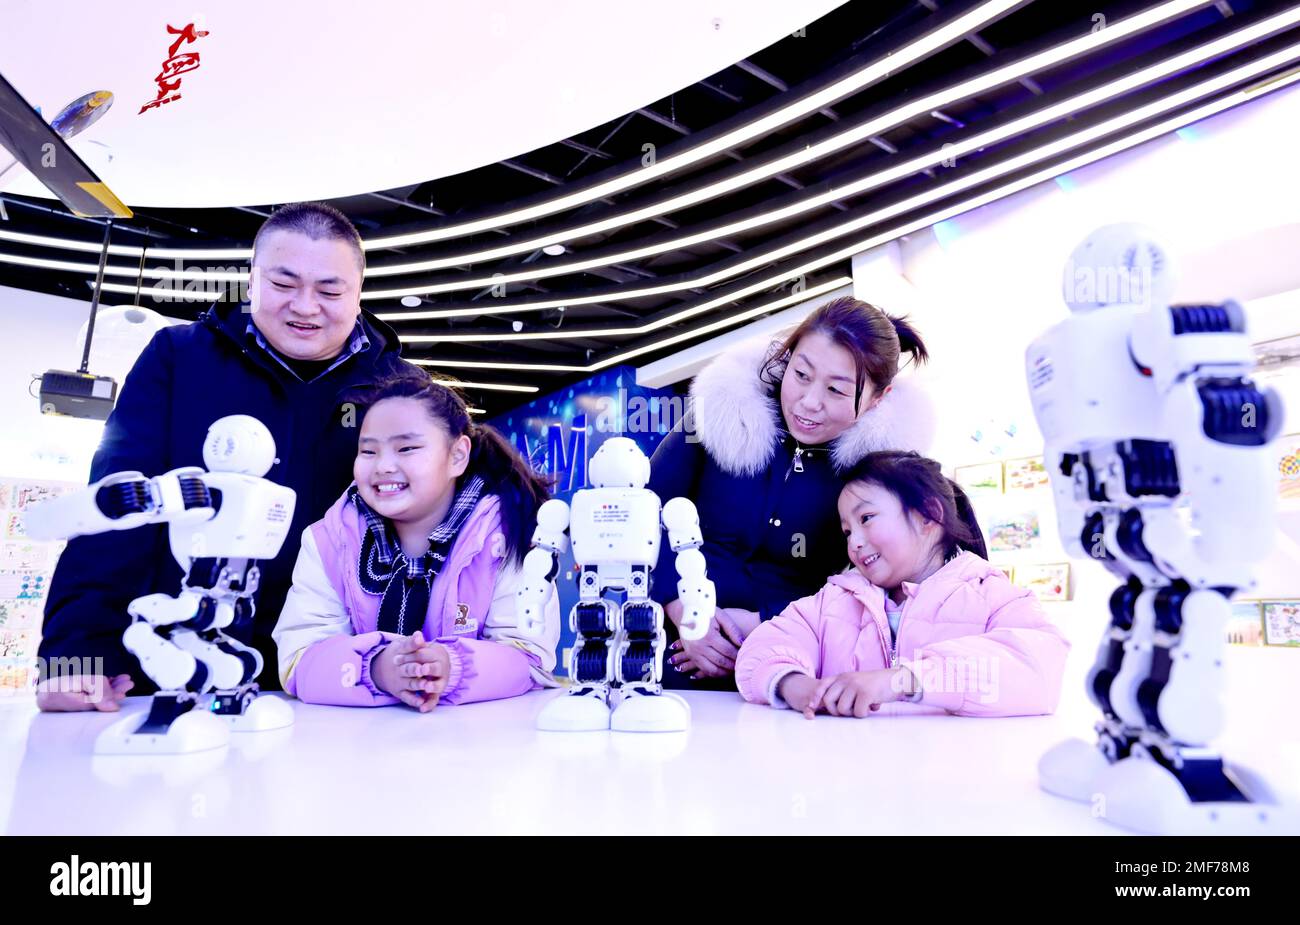 ZHANGYE, CHINA - JANUARY 24, 2023 - Parents and children watch a robot dance at Zhangye Science and Technology Museum in Linze county of Zhangye city, Stock Photo